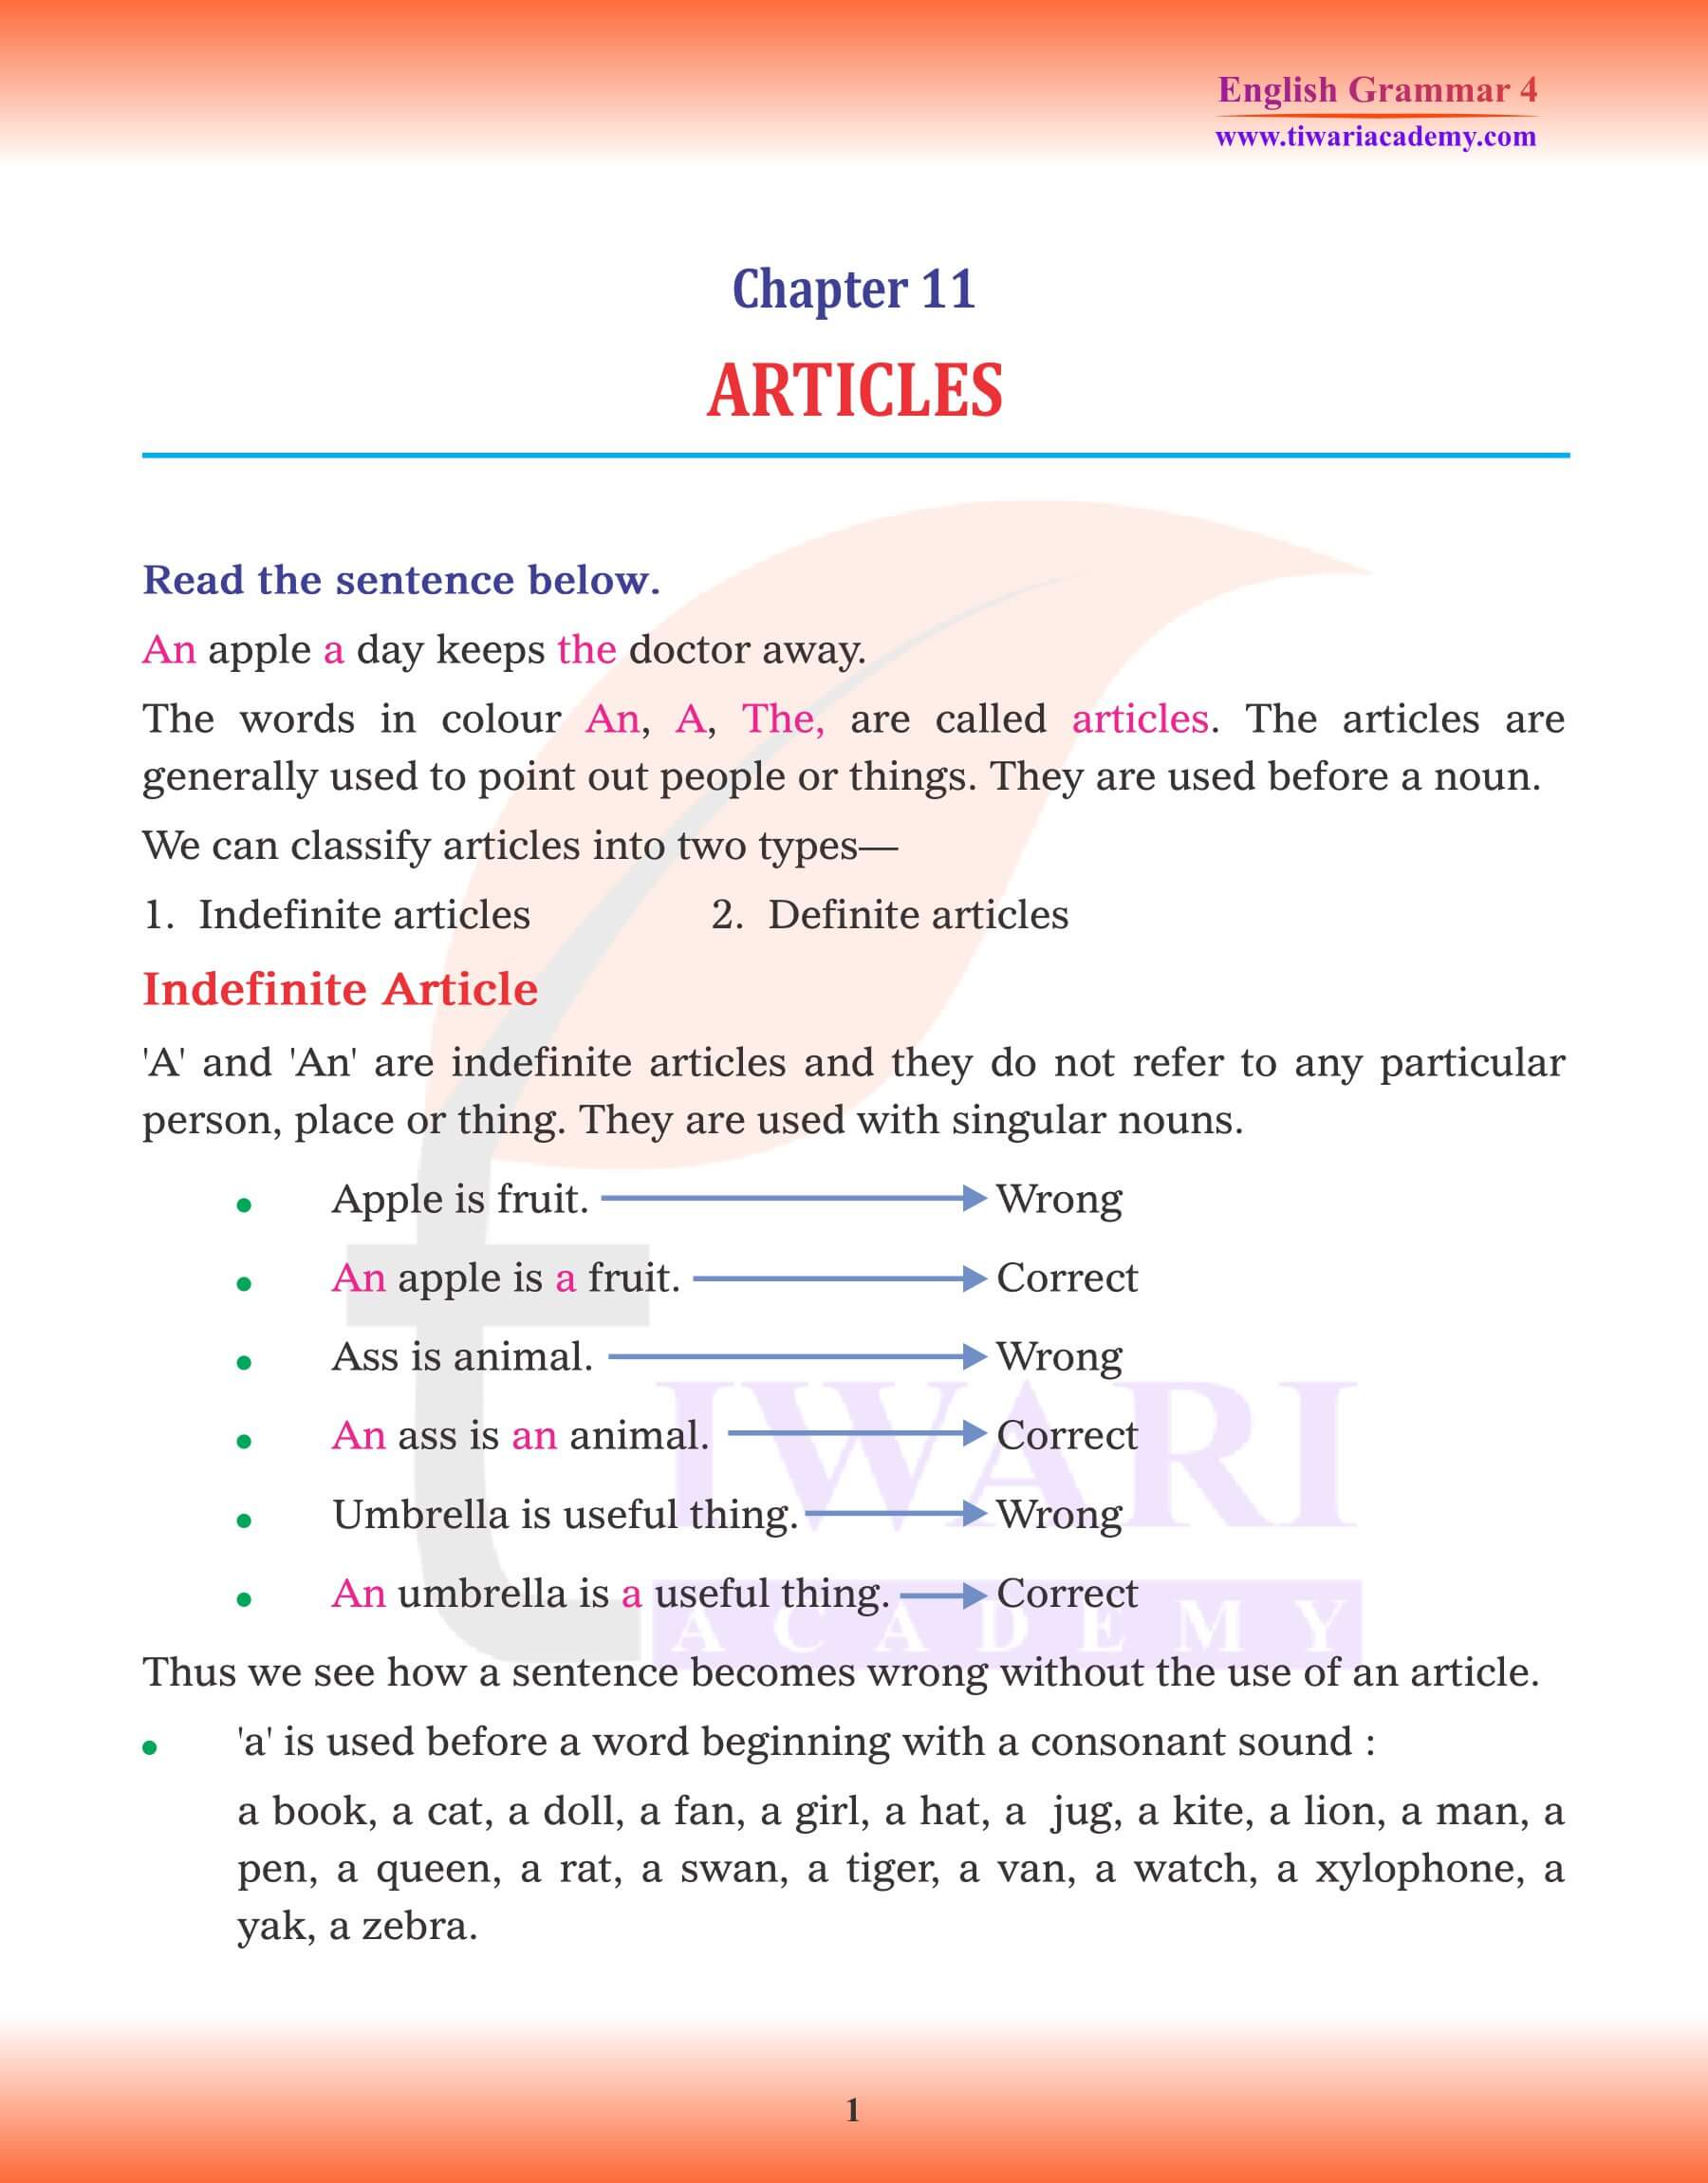 Class 4 English Grammar Chapter 11 Articles Examples